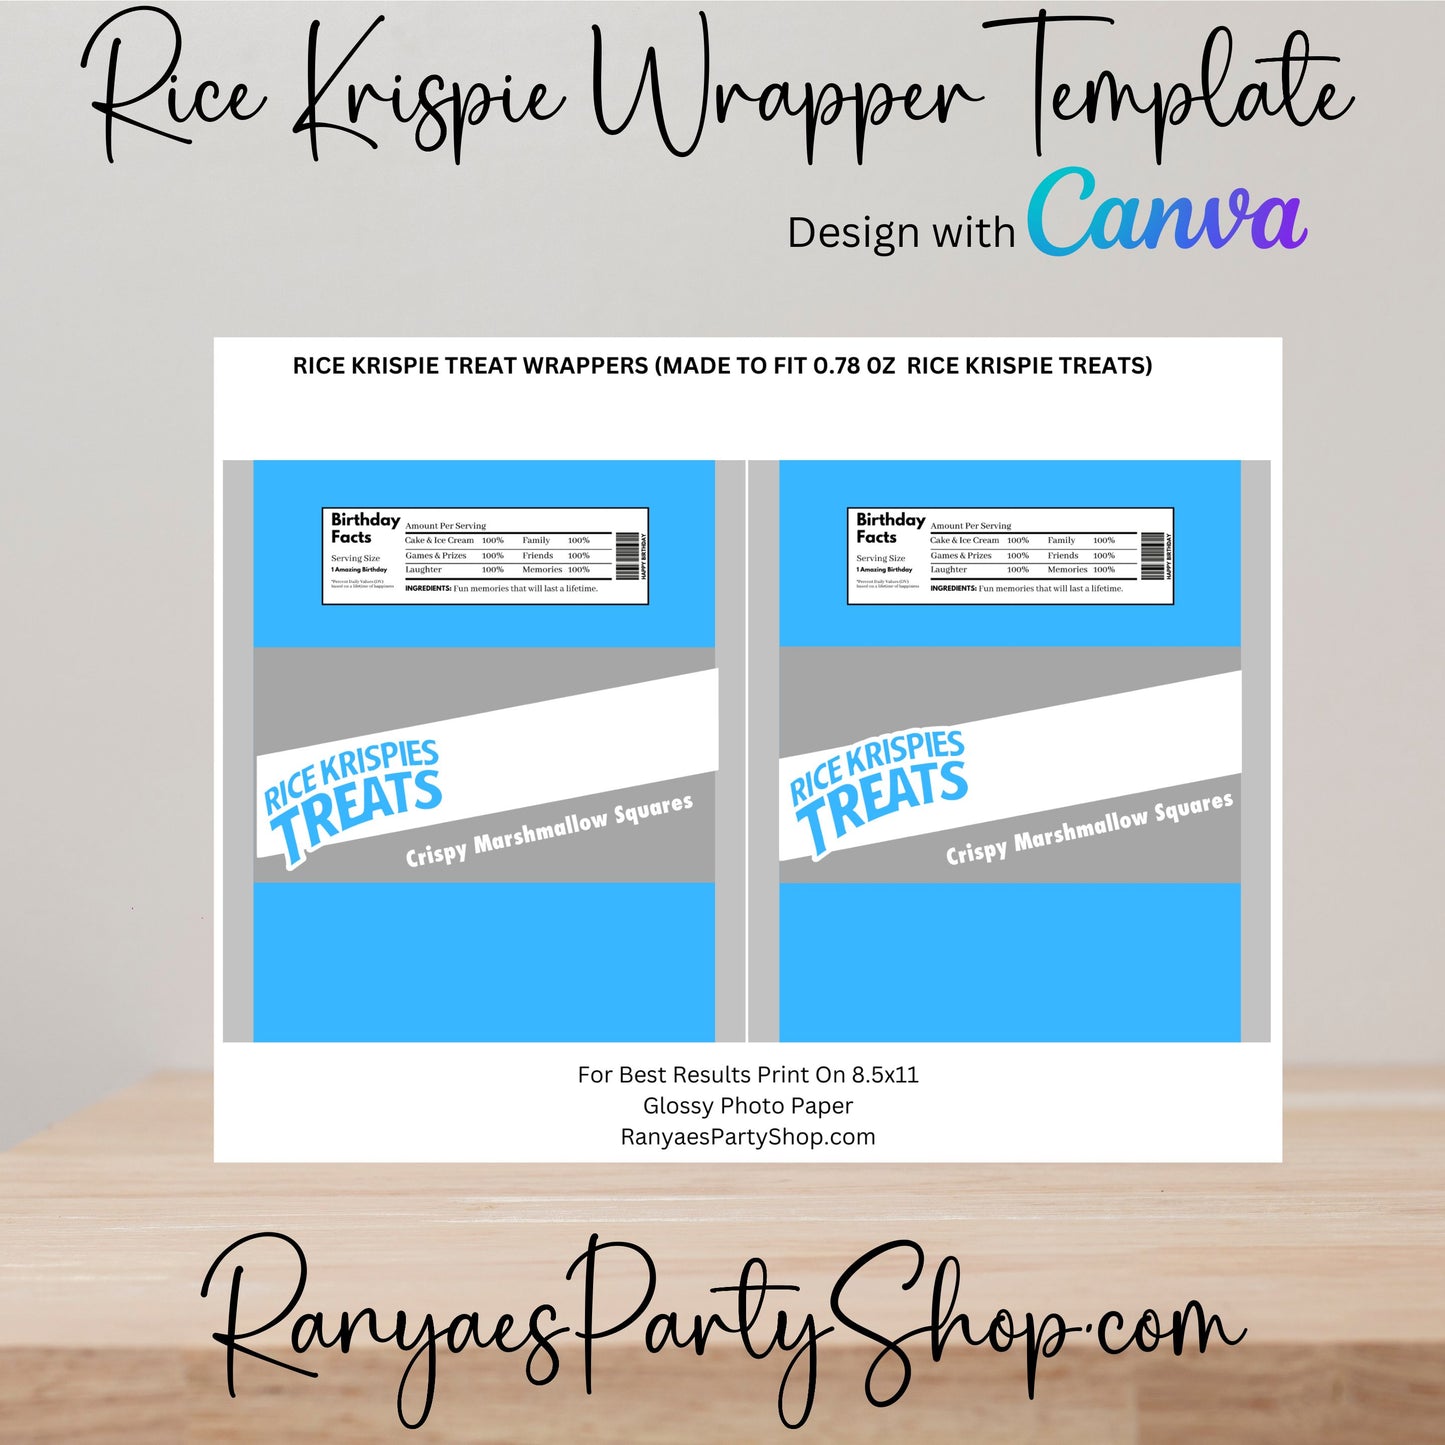 Rice Krispie Wrapper Template | Create Your Own Rice Krispie Wrapper | Blank Templates | You Design | Design with Canva | Canva Template